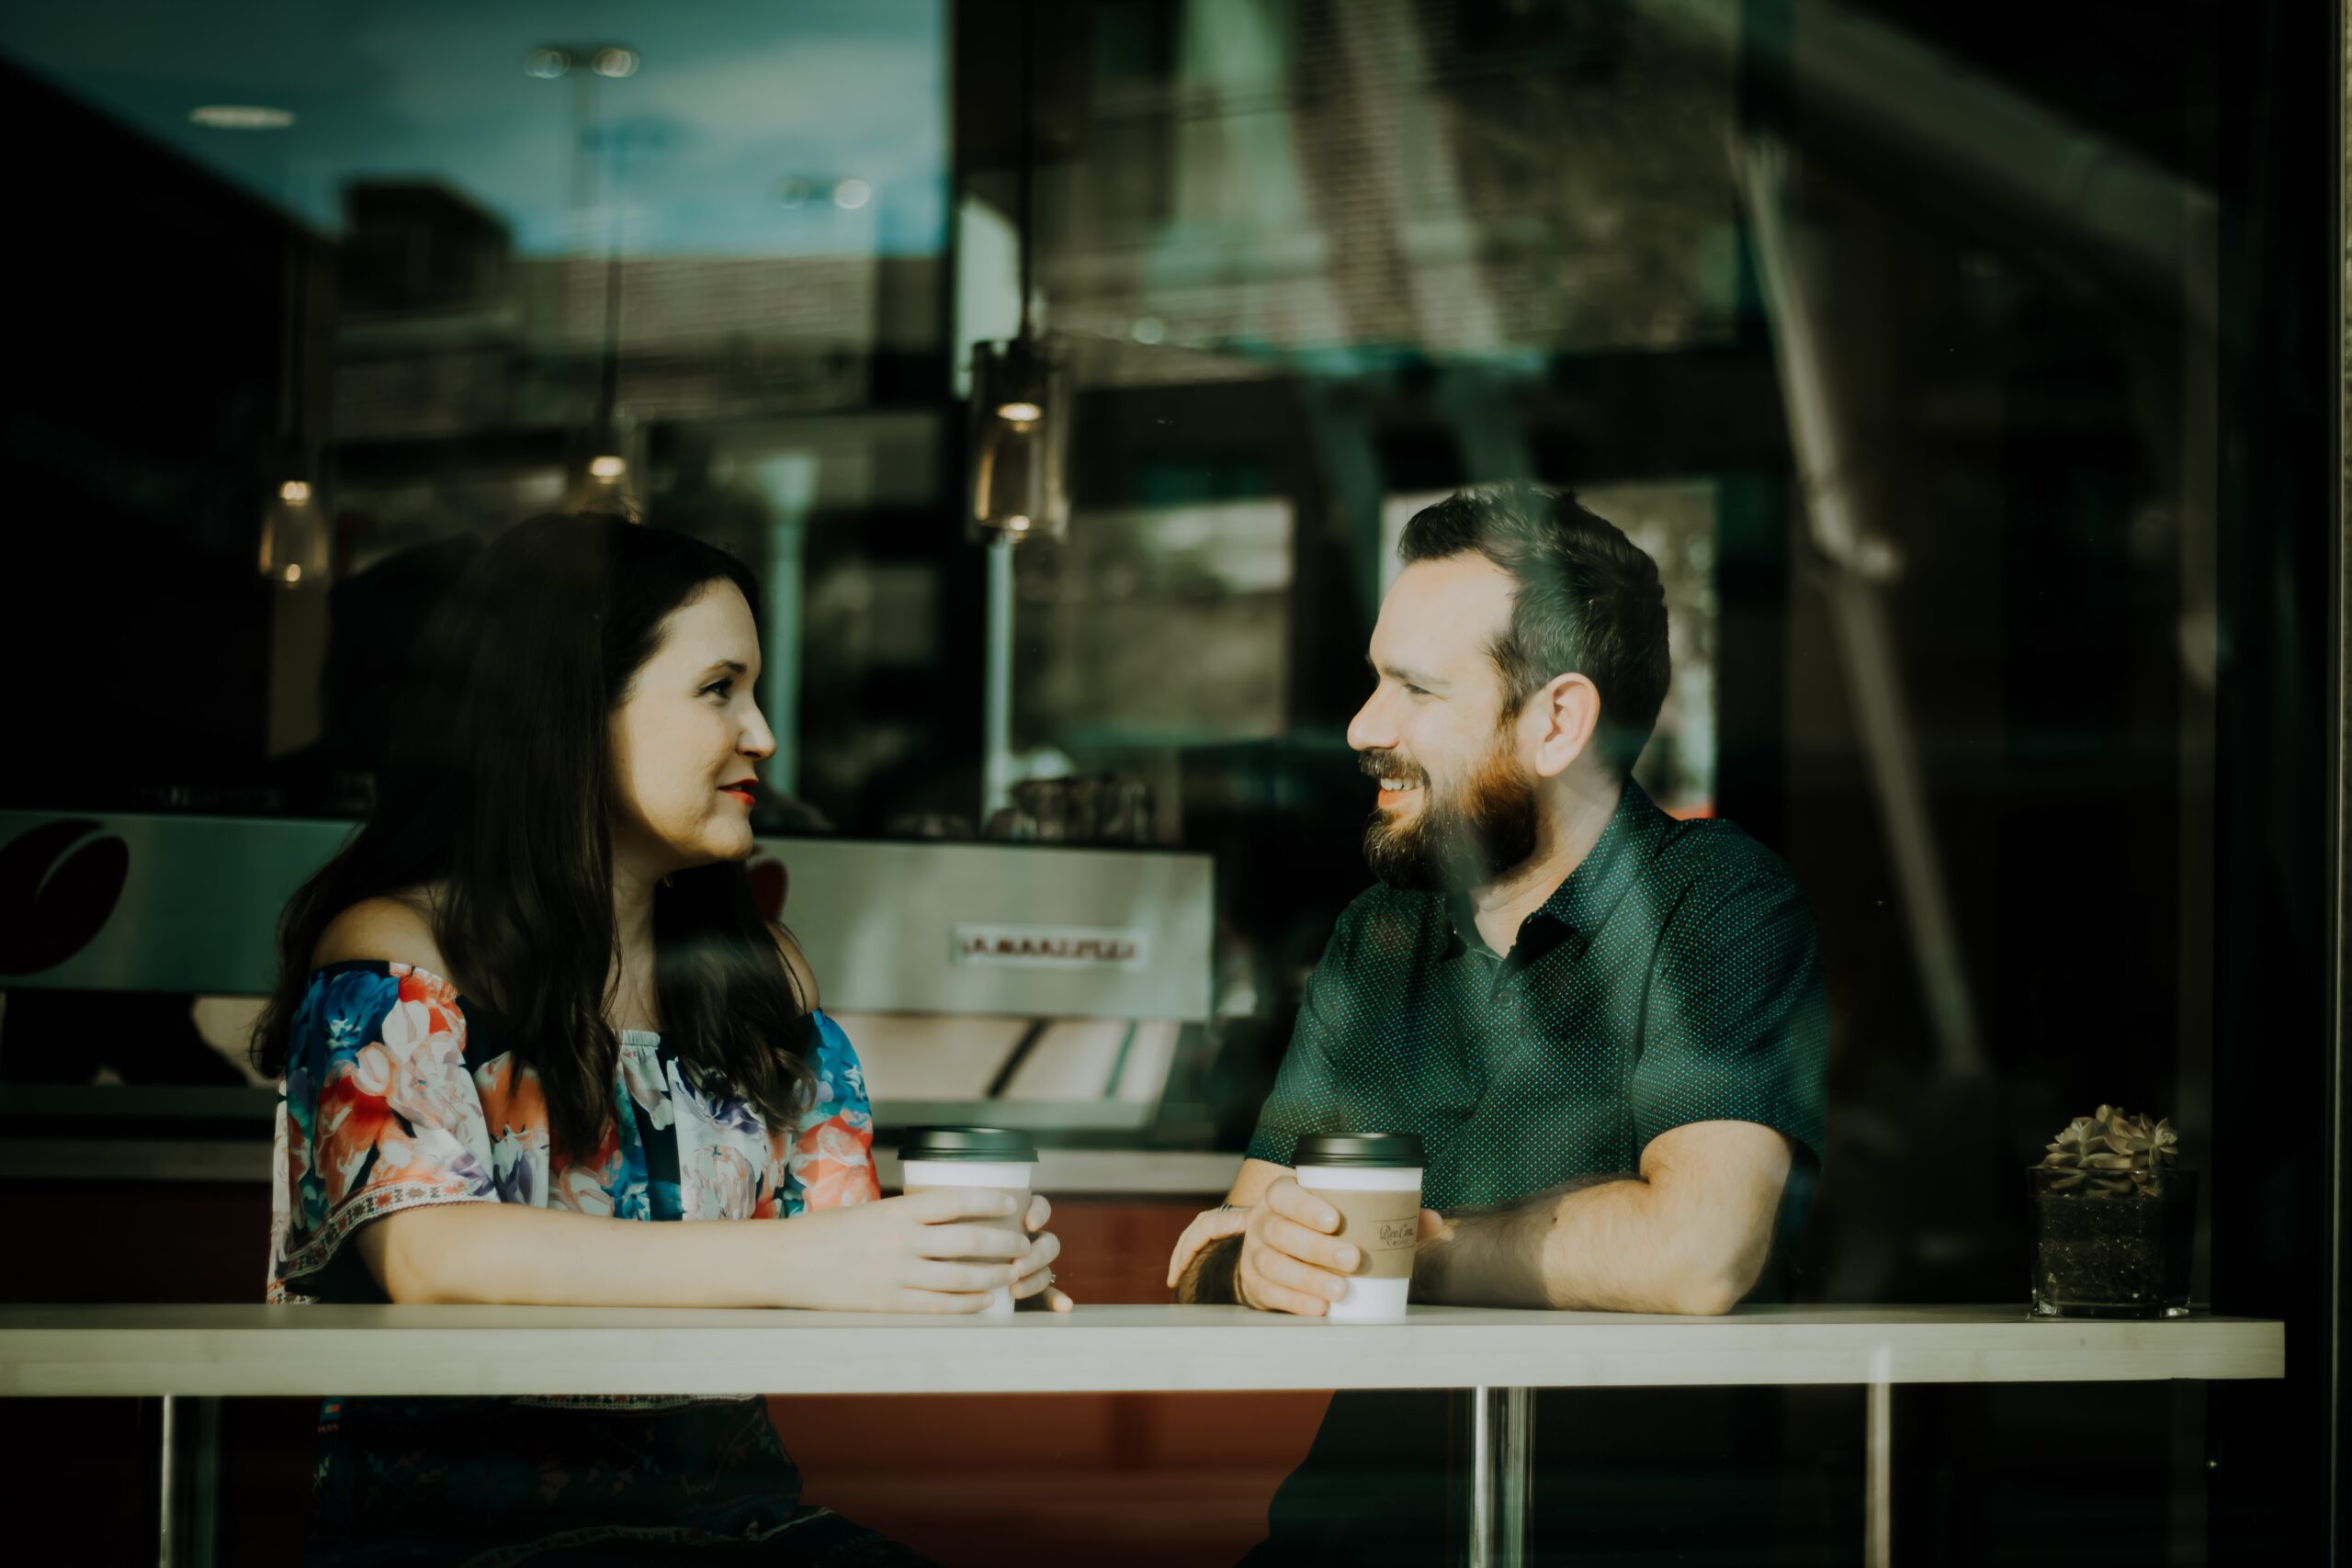 Couple having coffee while respectfully talking